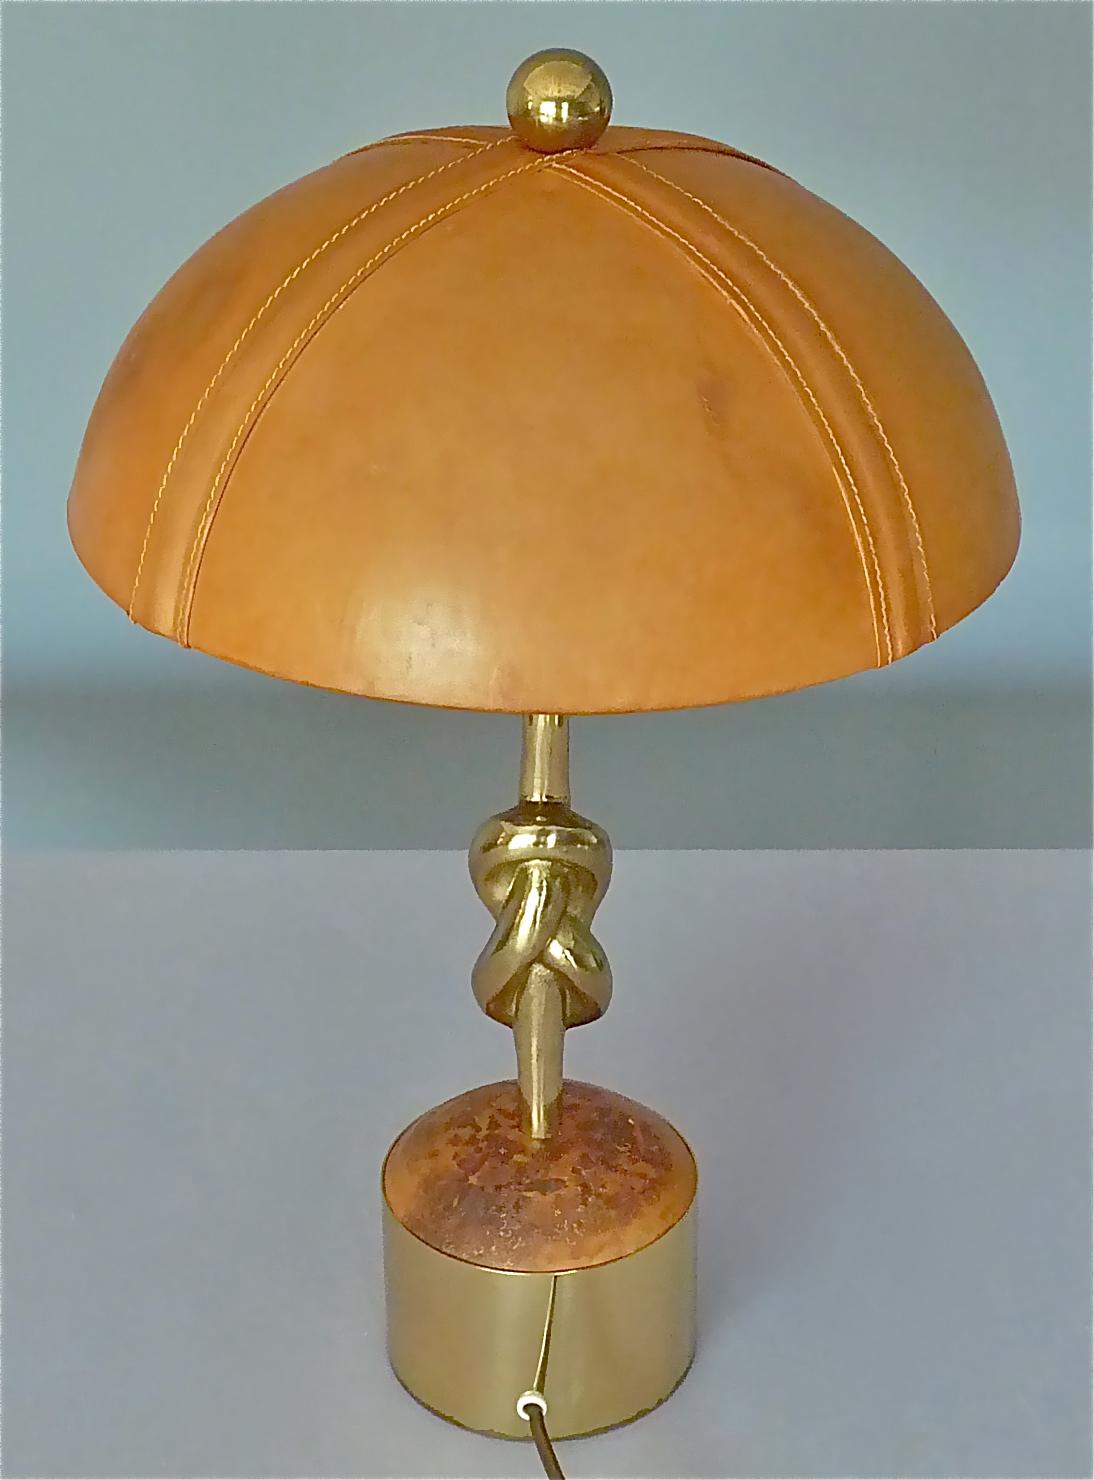 Sculptural Gilt Bronze Leather Knotted Table Lamp French 1970s Jansen Pergay Era For Sale 10